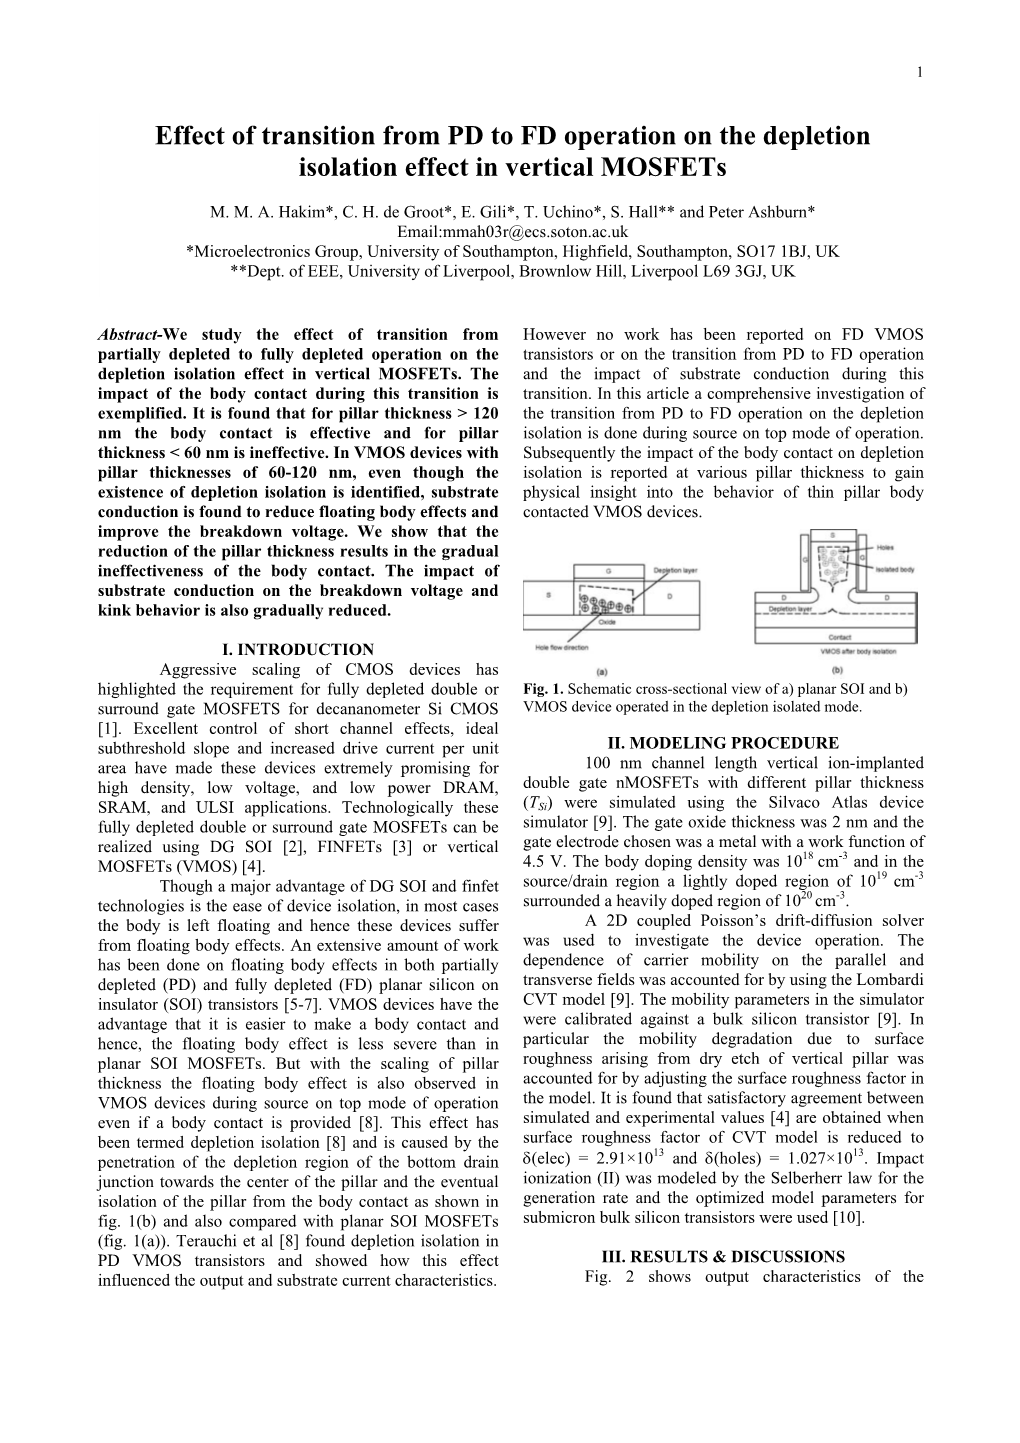 Effect of Transition from PD to FD Operation on the Depletion Isolation Effect in Vertical Mosfets